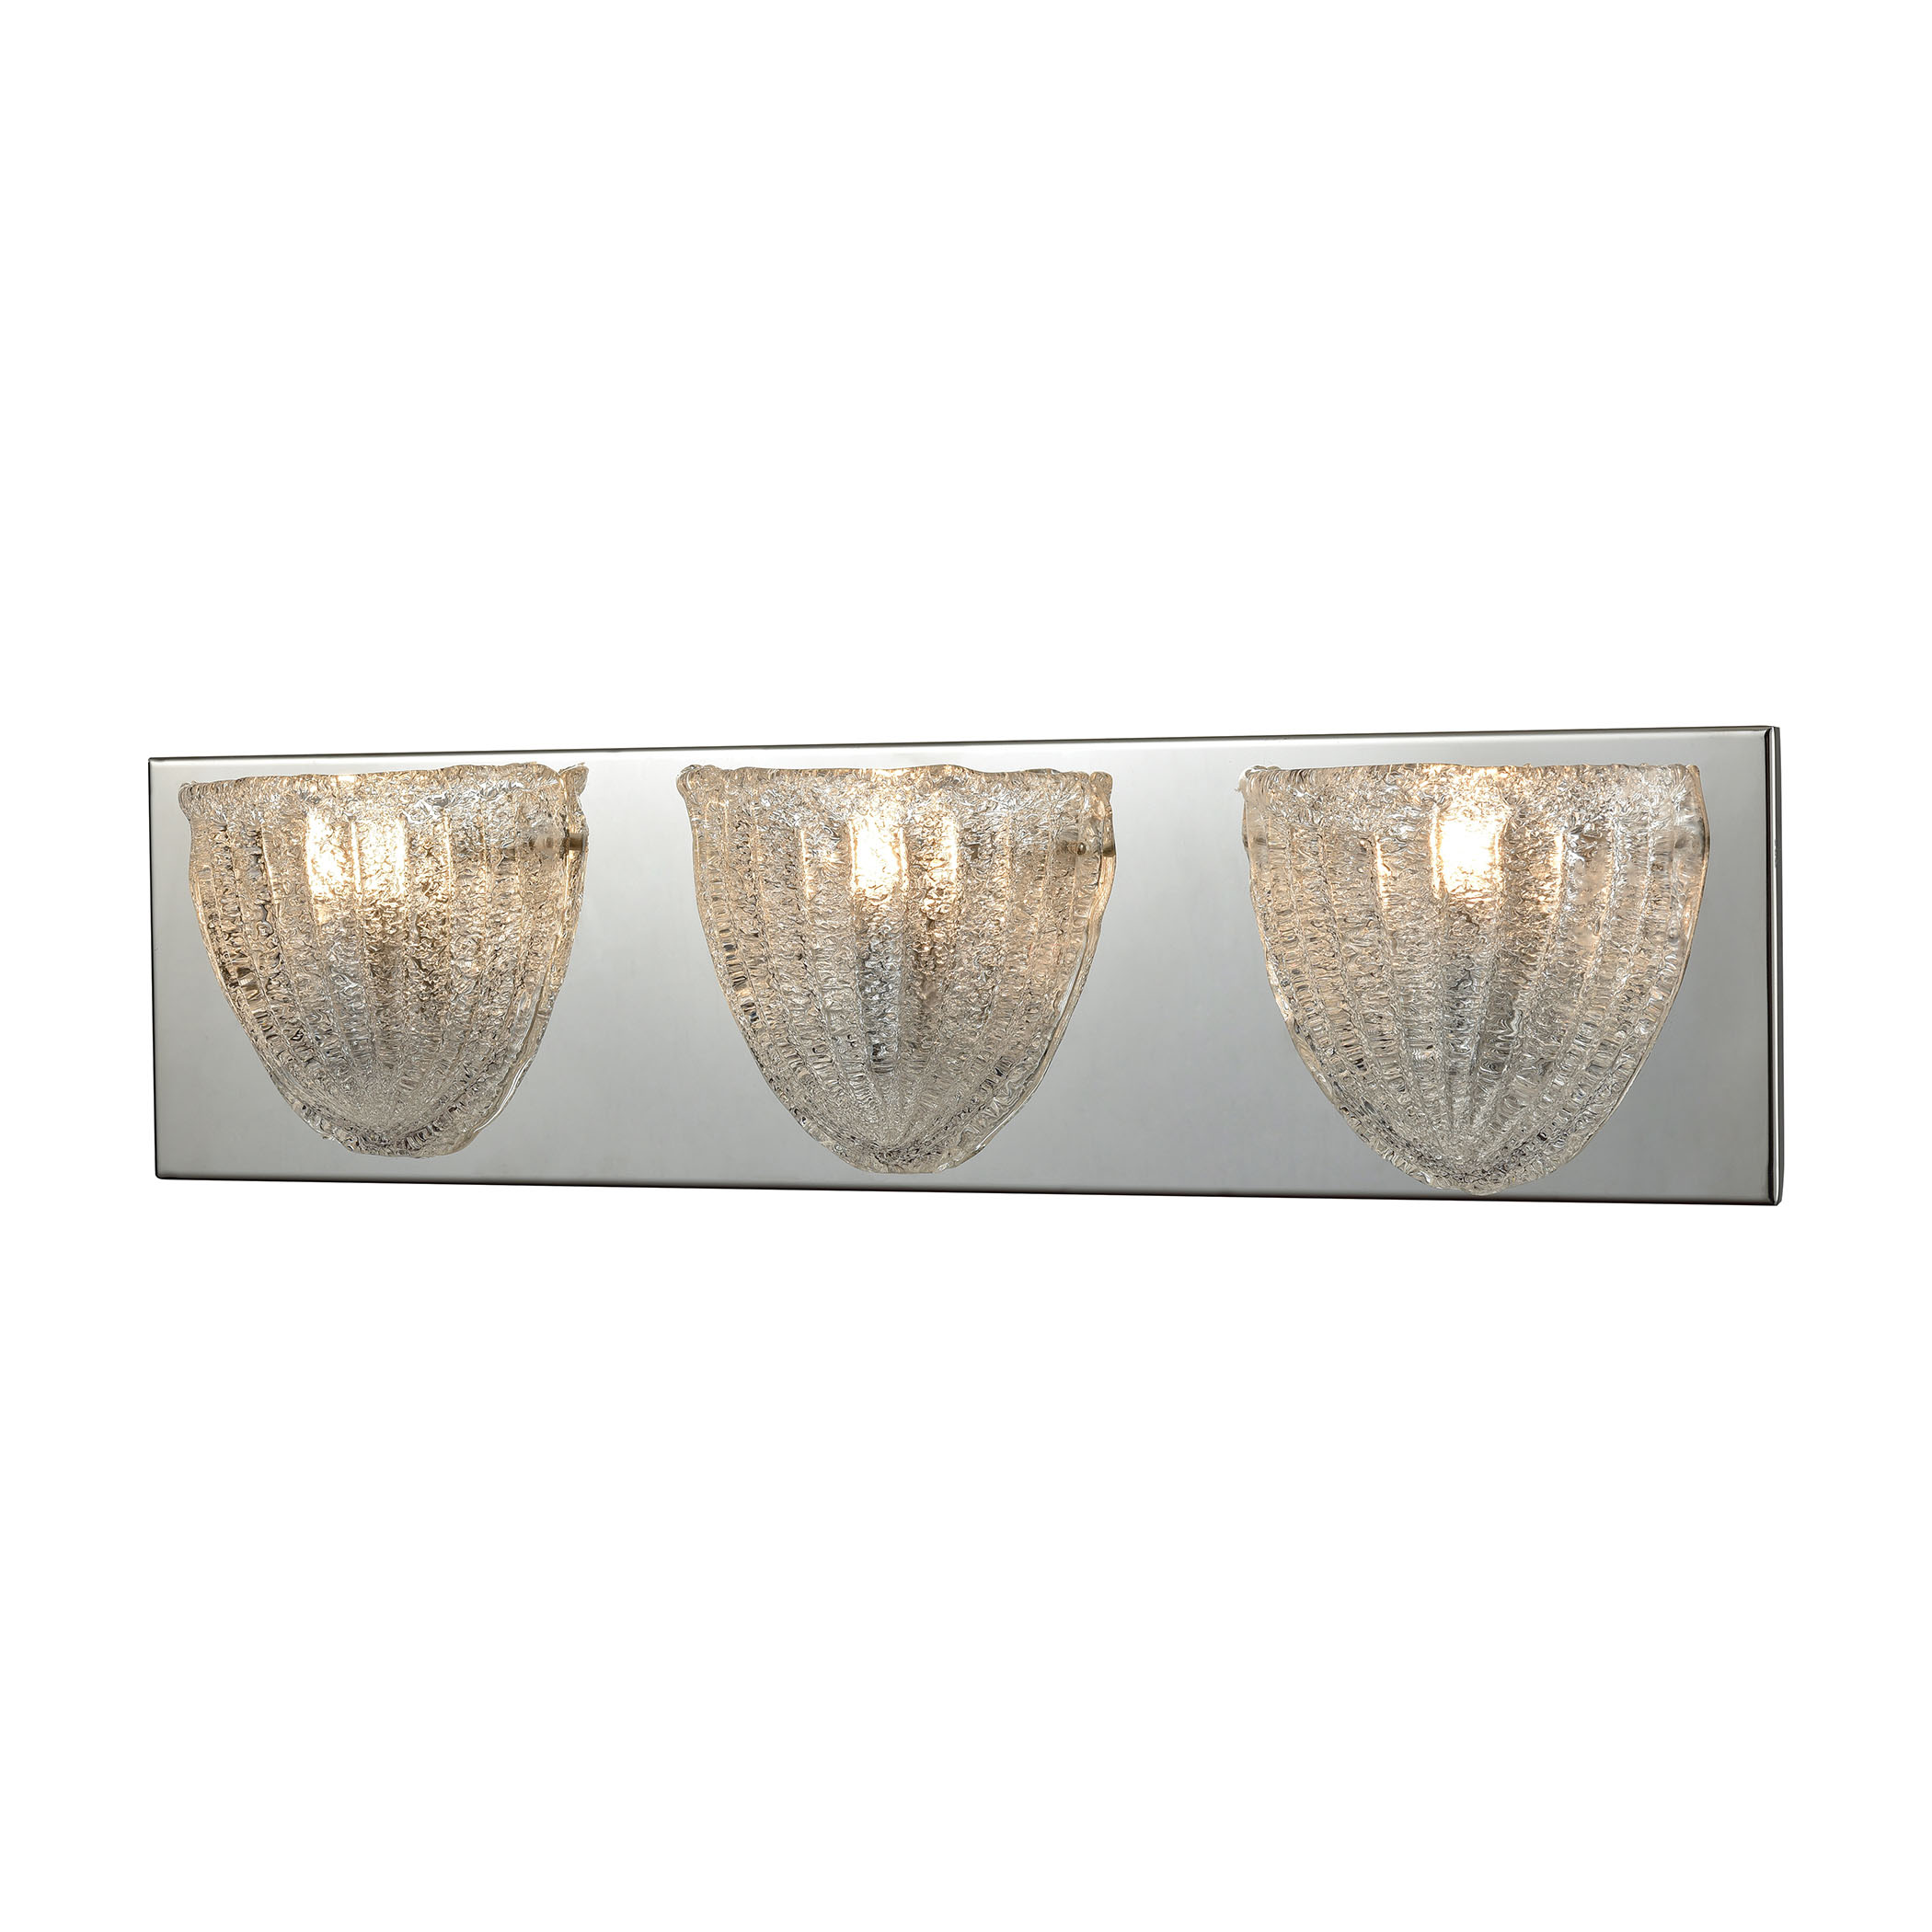 Verannis 3 Light Vanity in Polished Chrome with Hand-Formed Clear Sugar Glass